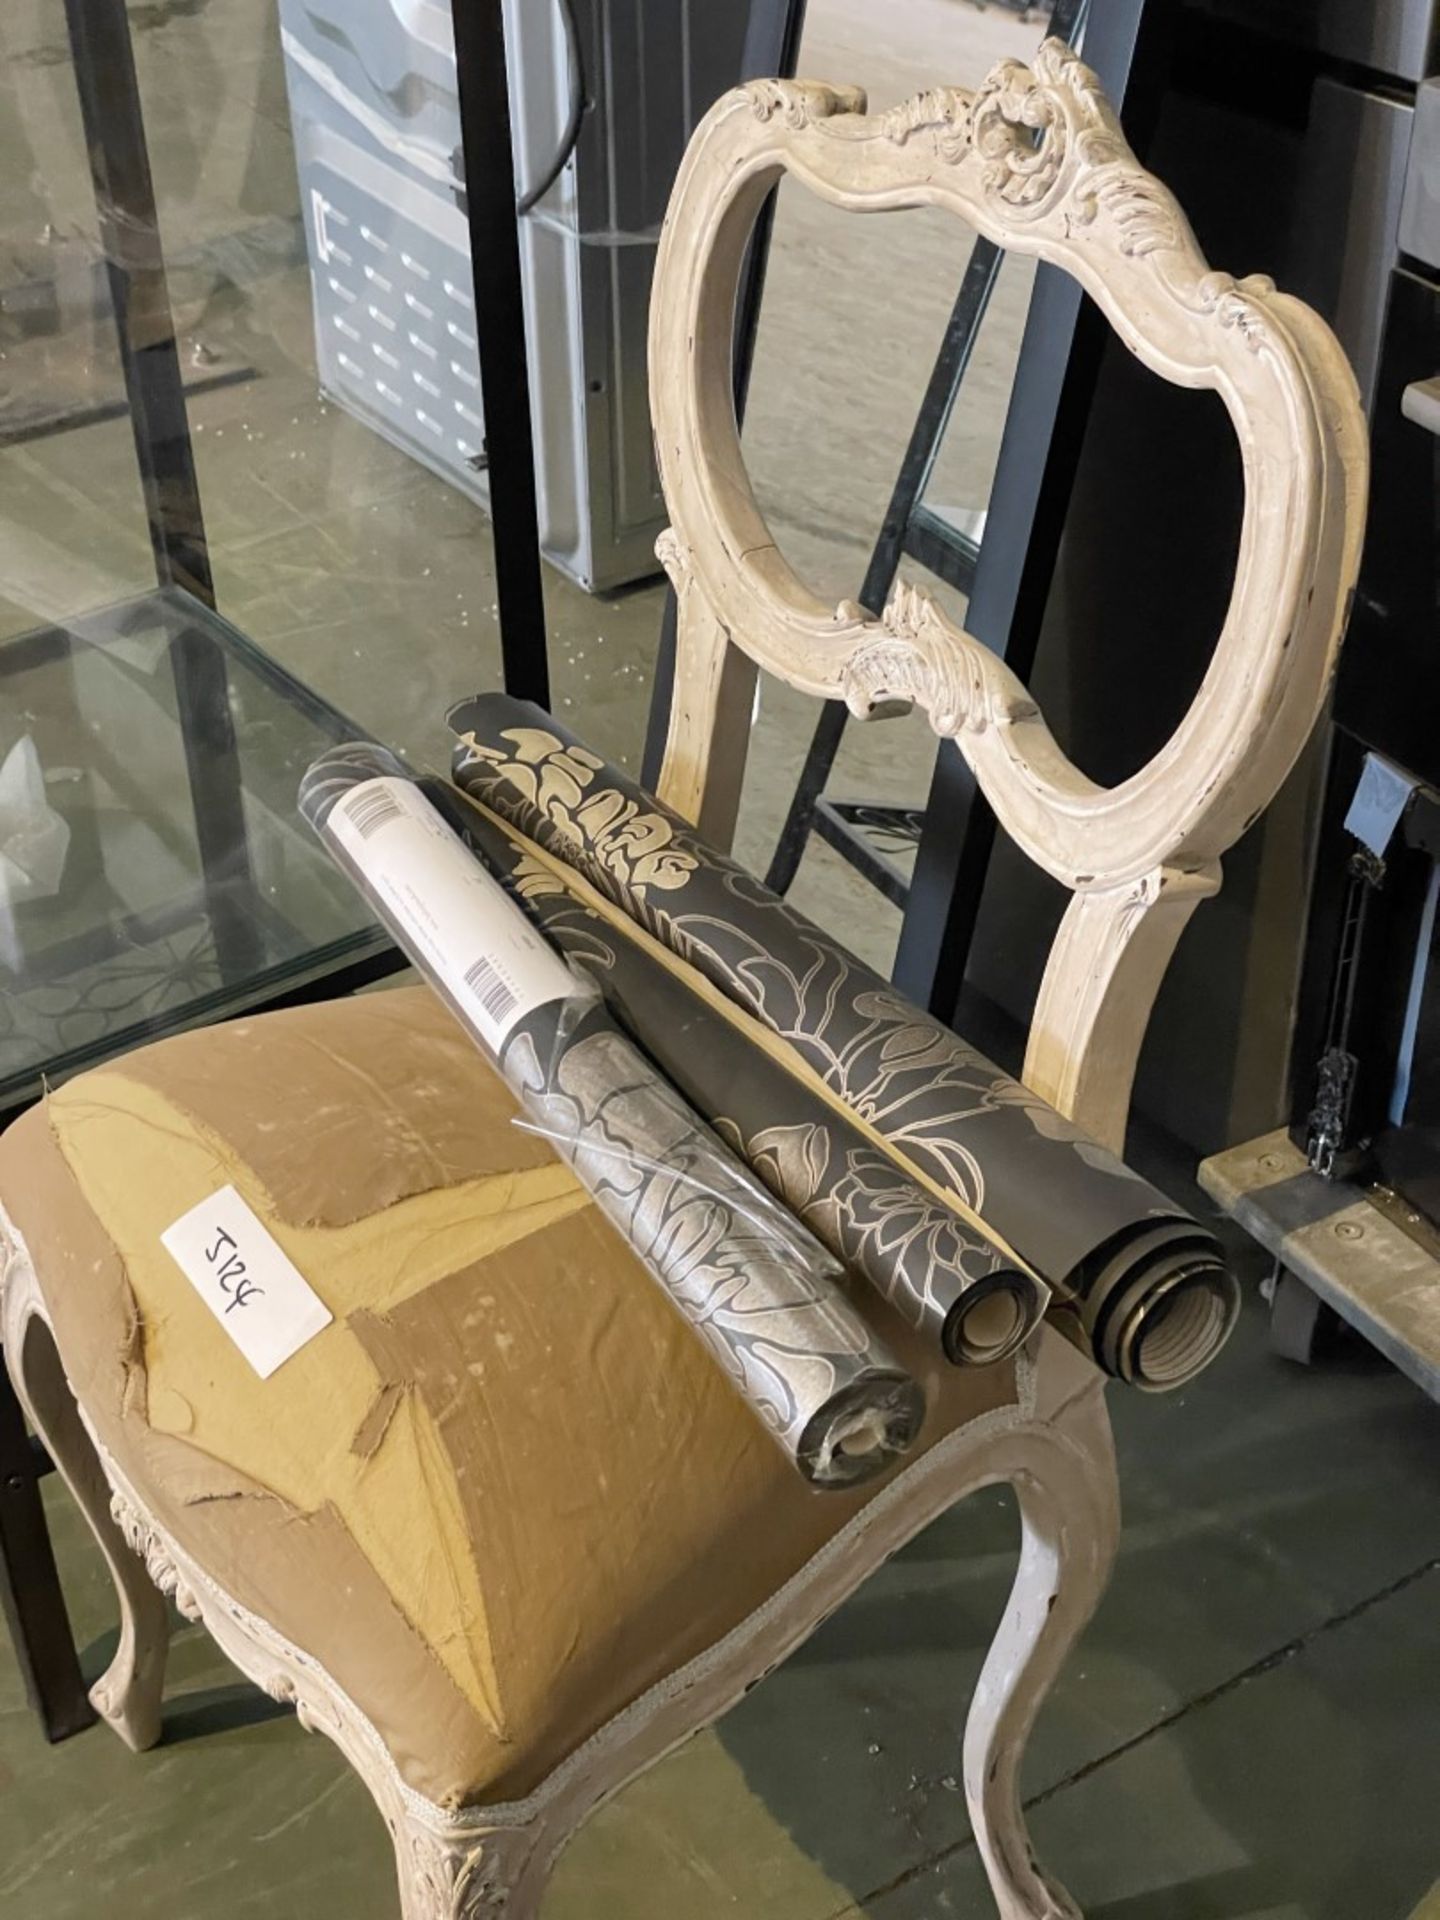 1 x Ornate Chair And Assorted Rolls Of Wallpaper/Gift Wrap Paper As Per Picture - Ref: J124 - - Image 8 of 8